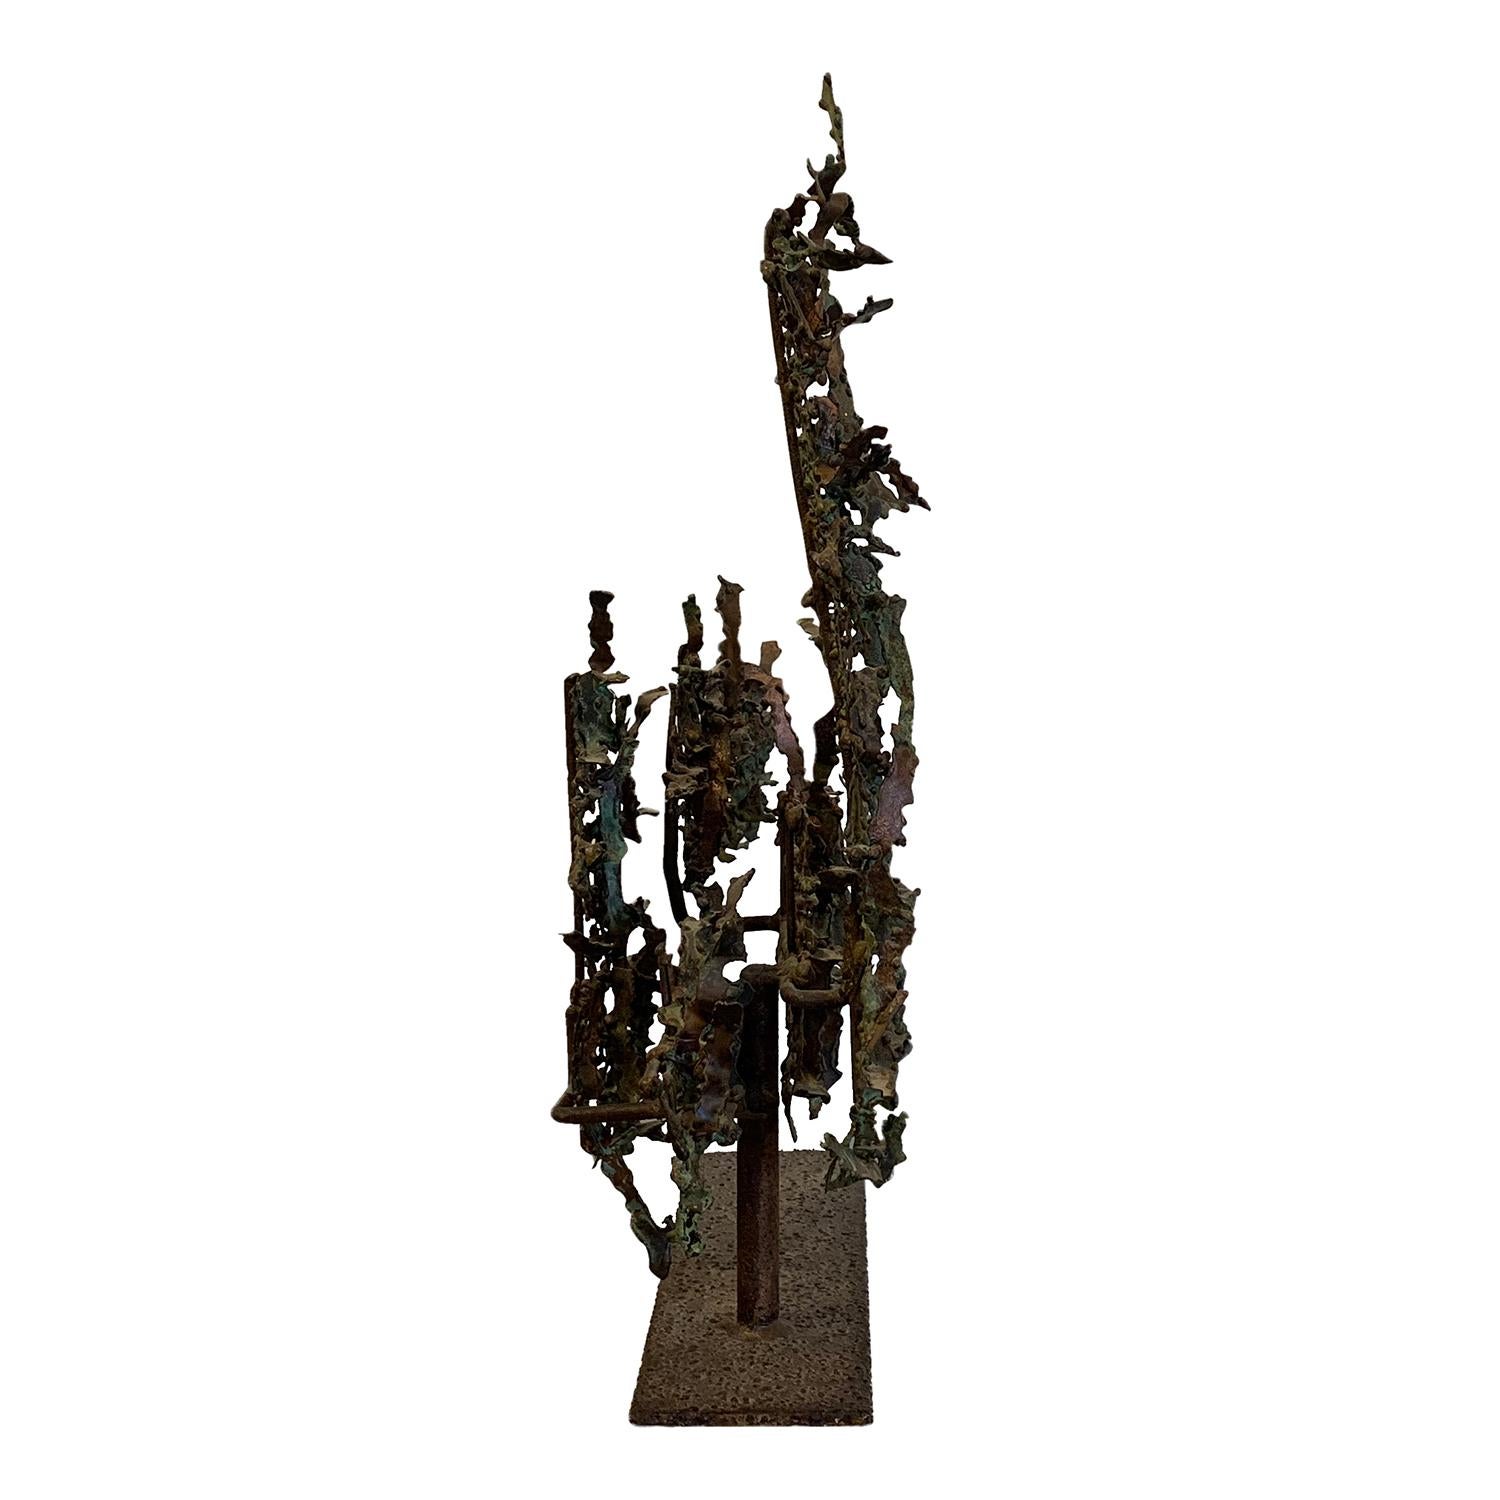 Hand-Crafted 20th Century Italian Brutalist Abstract Metal Sculpture by Marcello Fantoni